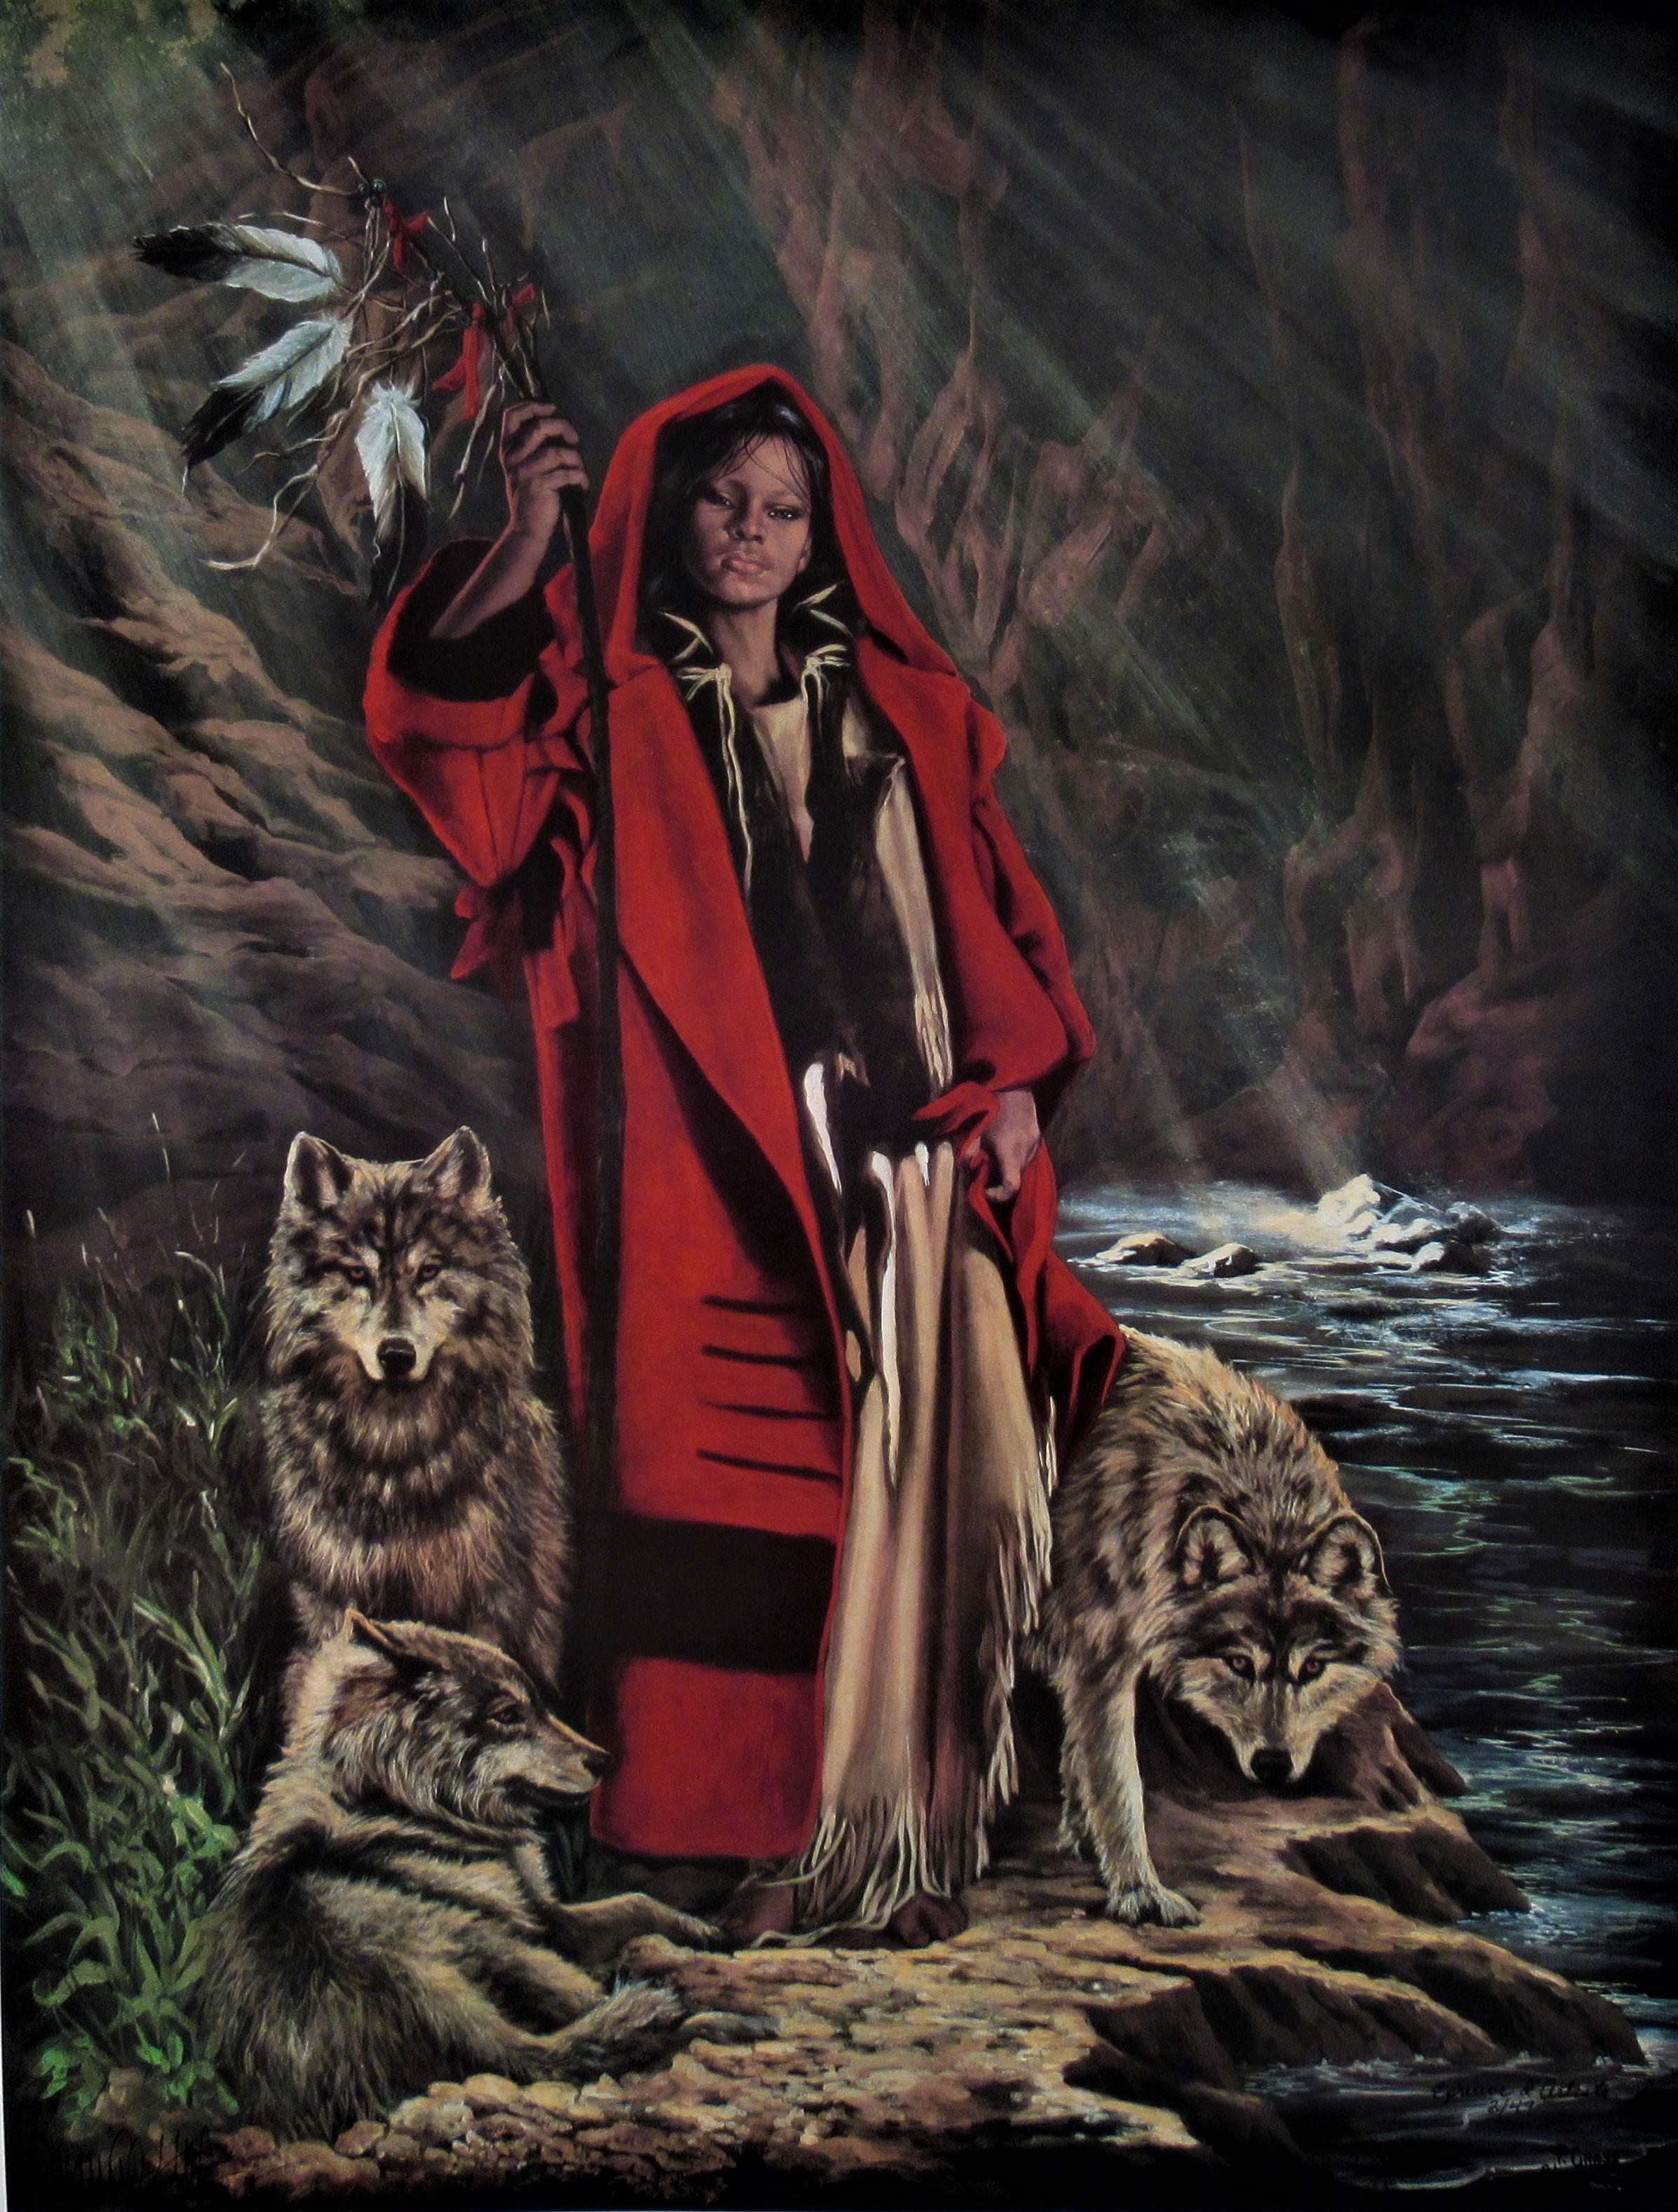  Biagoth Eecuebeh Hehsheesh-Chedah (Red Ridinghood and her Wolves) - Print by Penni Anne Cross